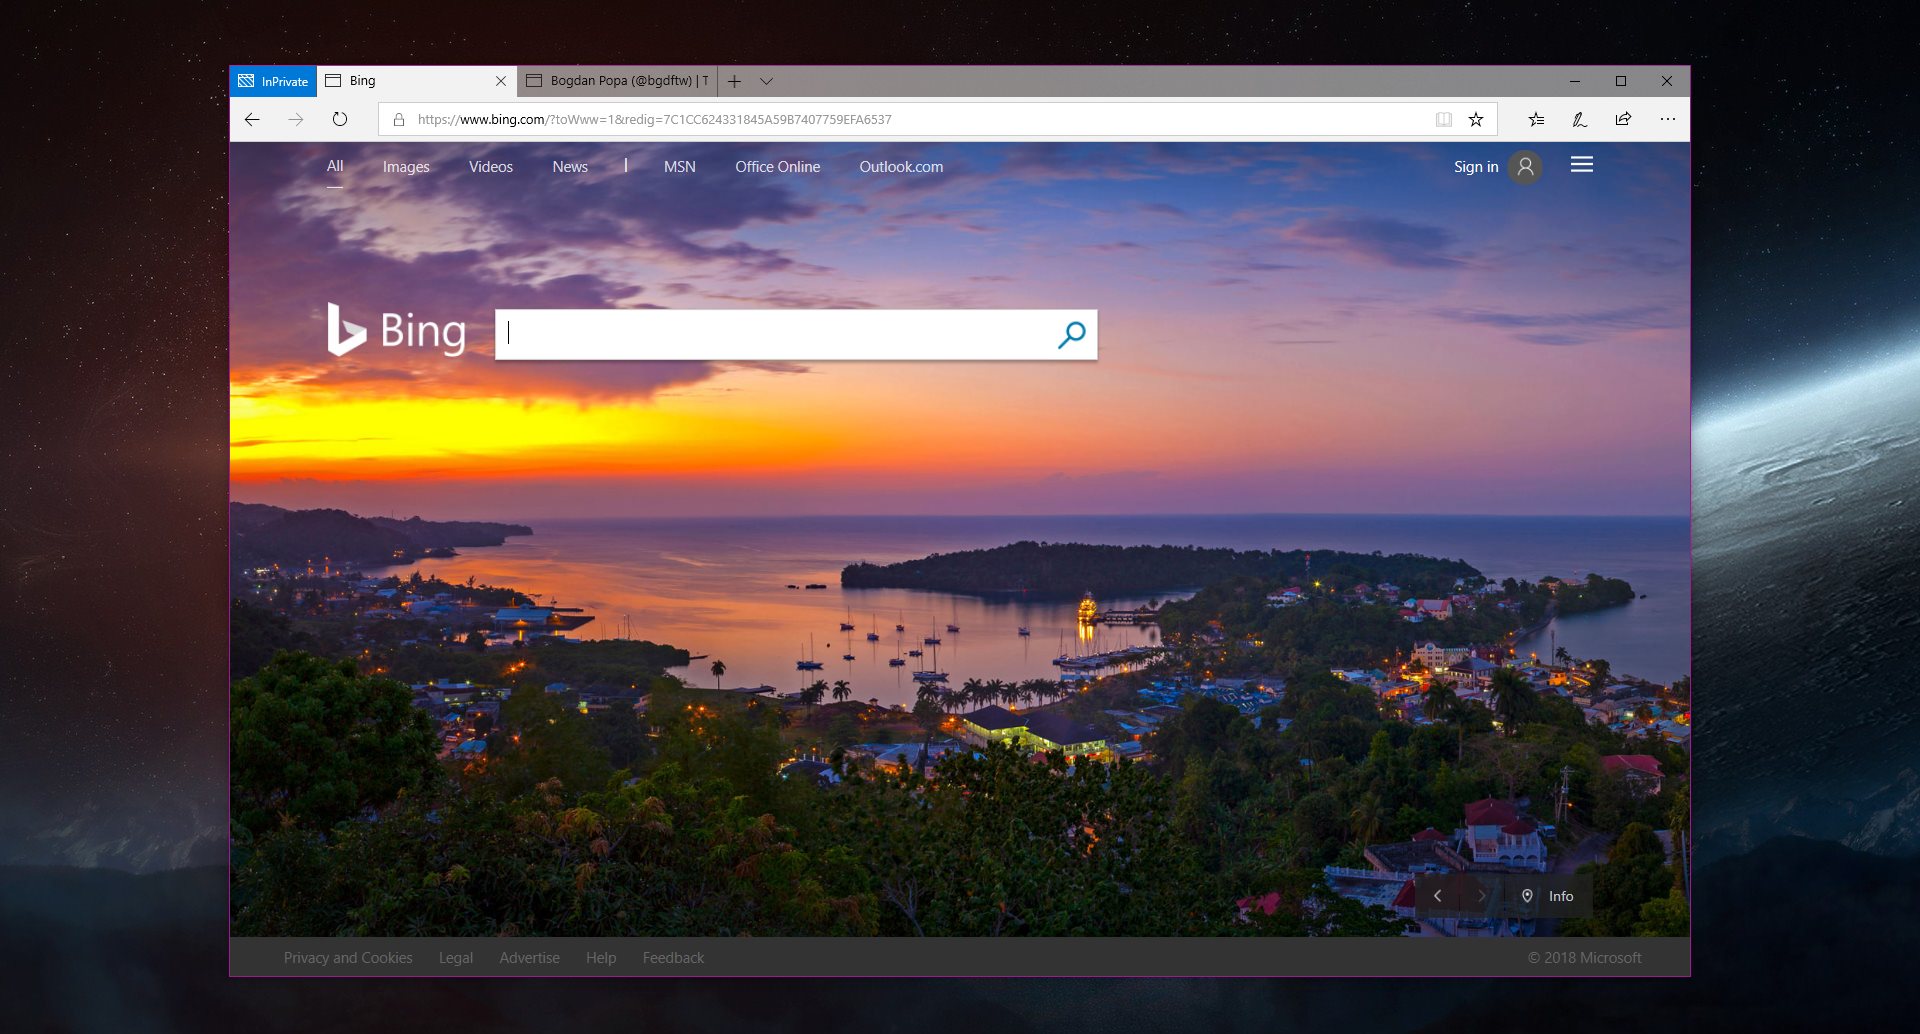 ms edge browser for mac